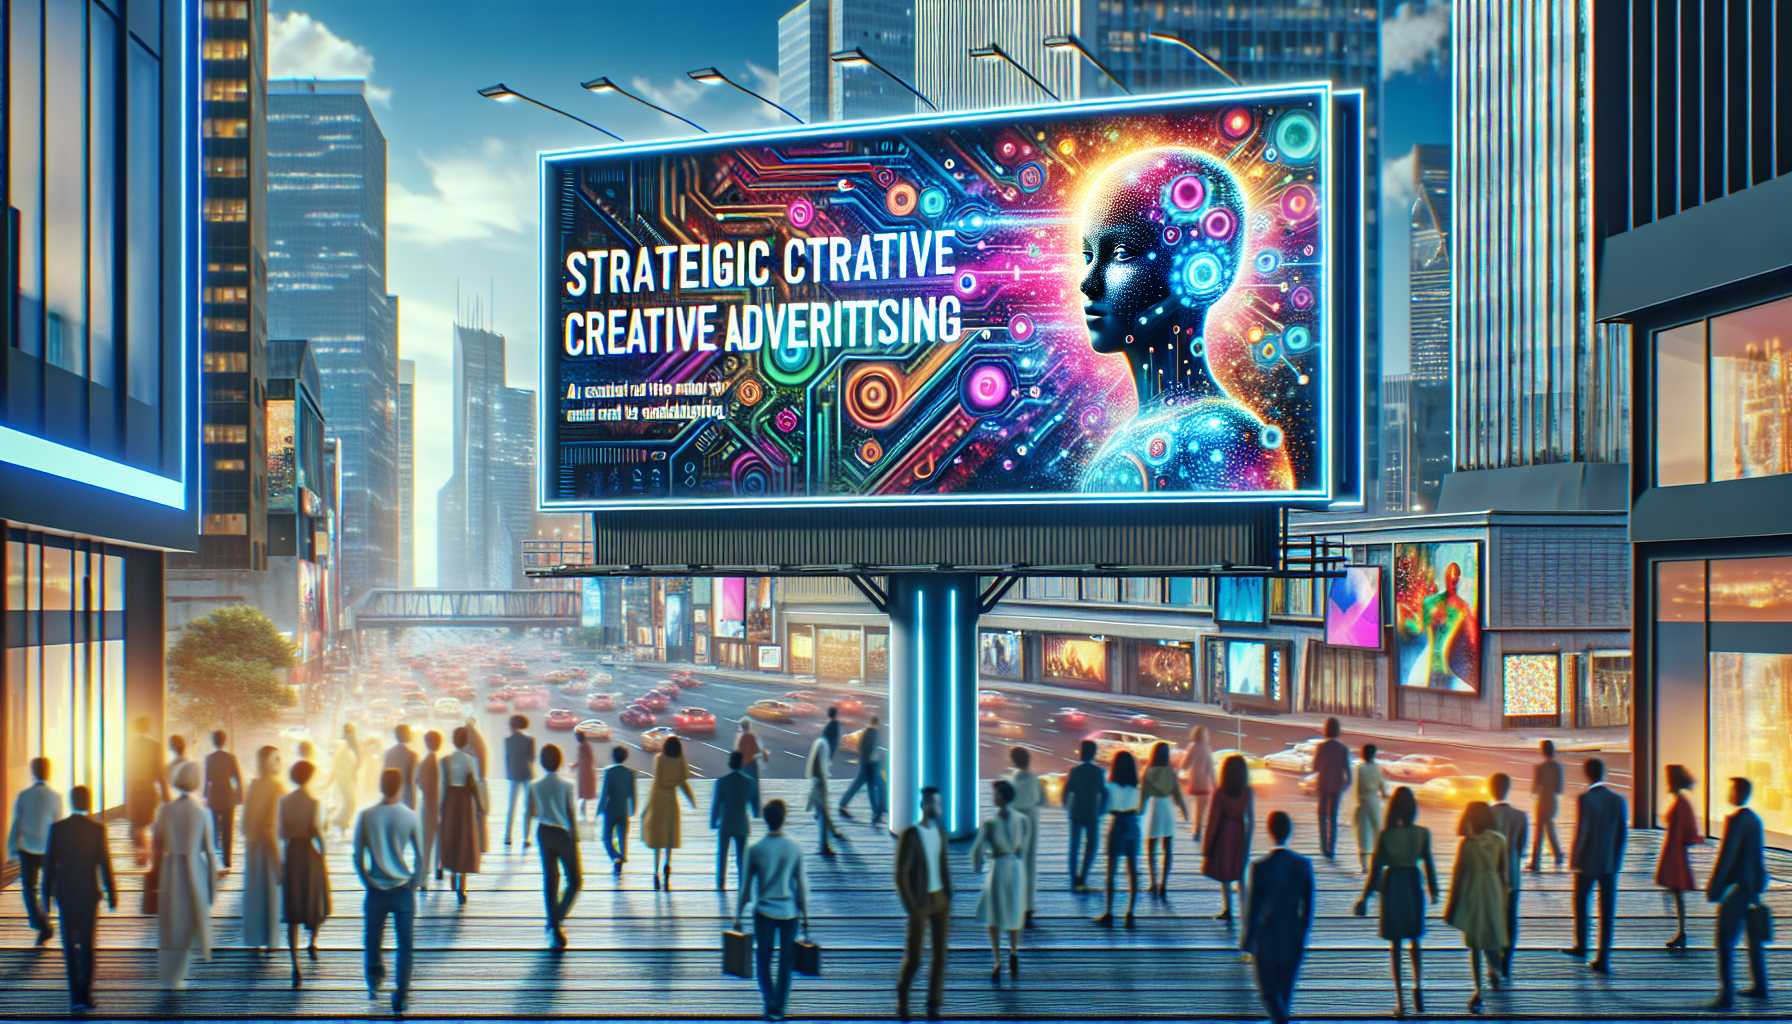 Strategic creative advertising with AI influence